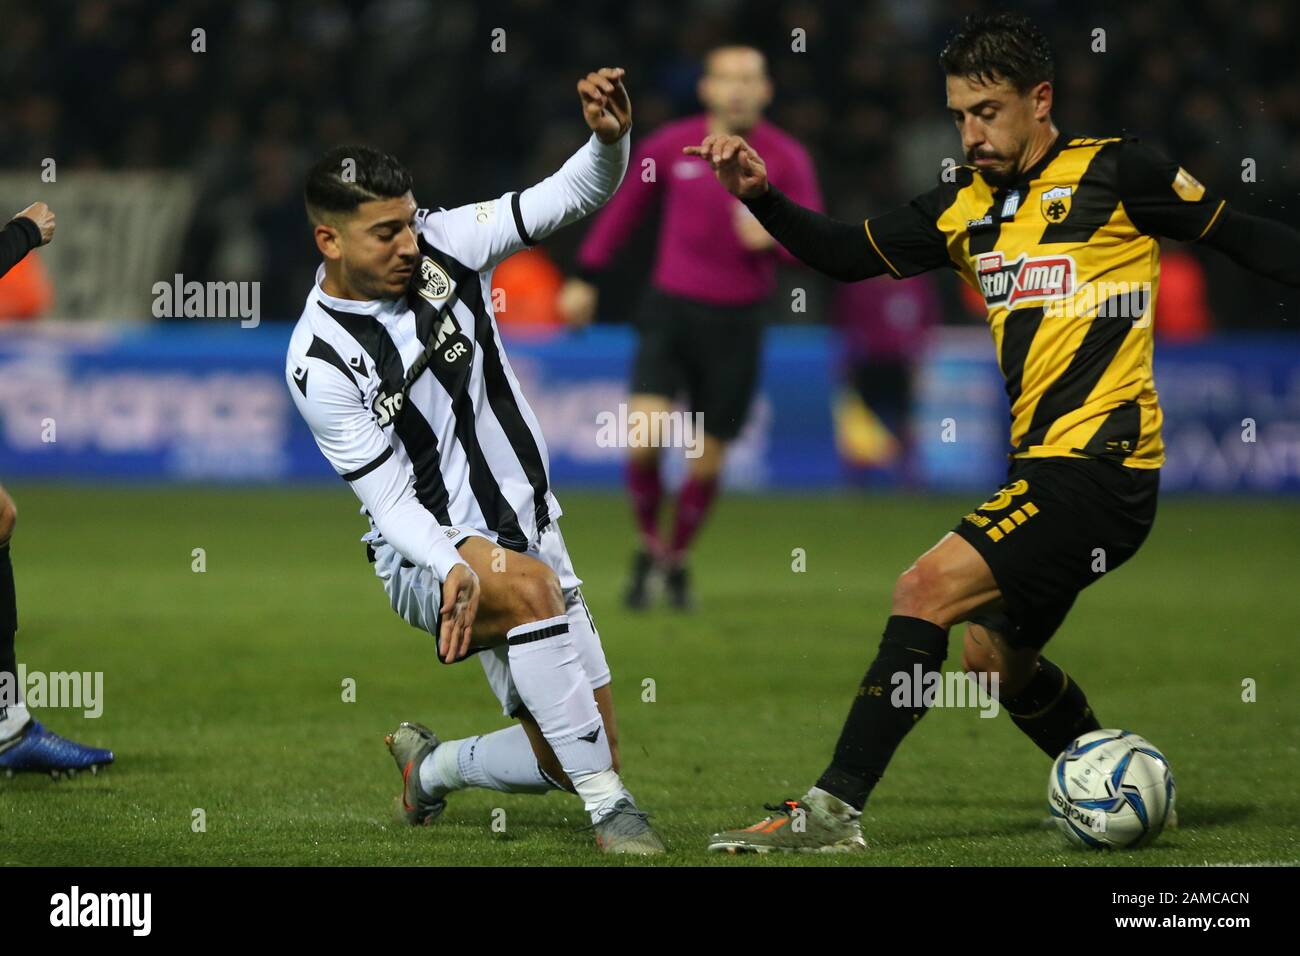 Thessaloniki, Greece. 12th Jan, 2020. PAOK FC player Dimitris Limnios (L)  and AEK's Nelson Oliveira (R) fight for the ball. Classic derby for the  Greek Soccer Superleague between PAOK FC and AEK